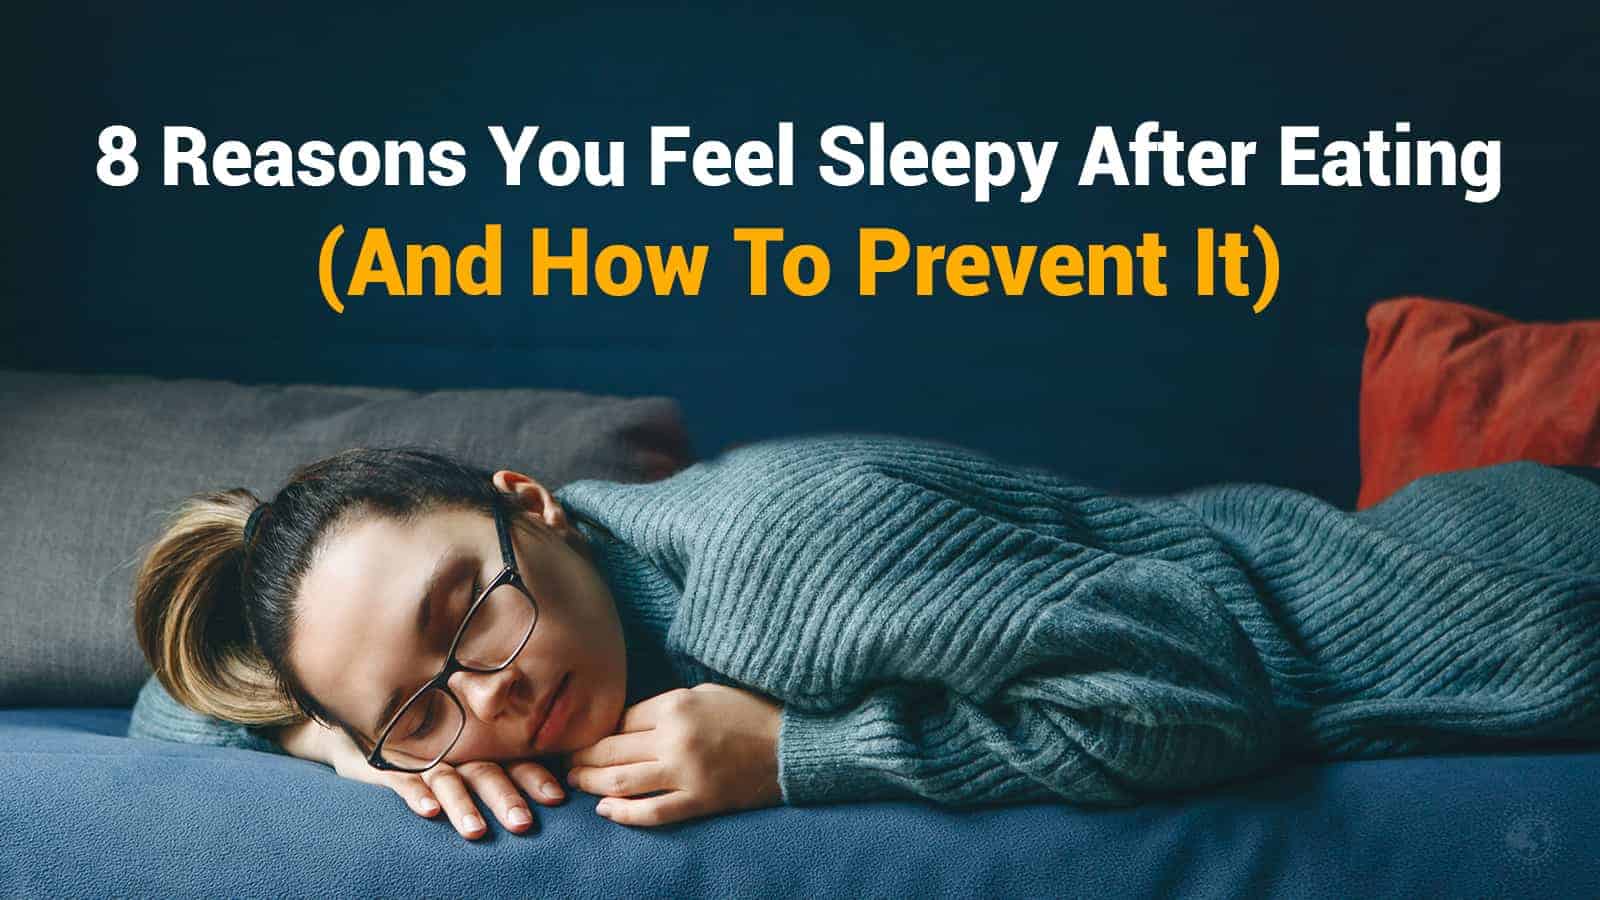 8 Reasons You Feel Sleepy After Eating (And How To Prevent It)